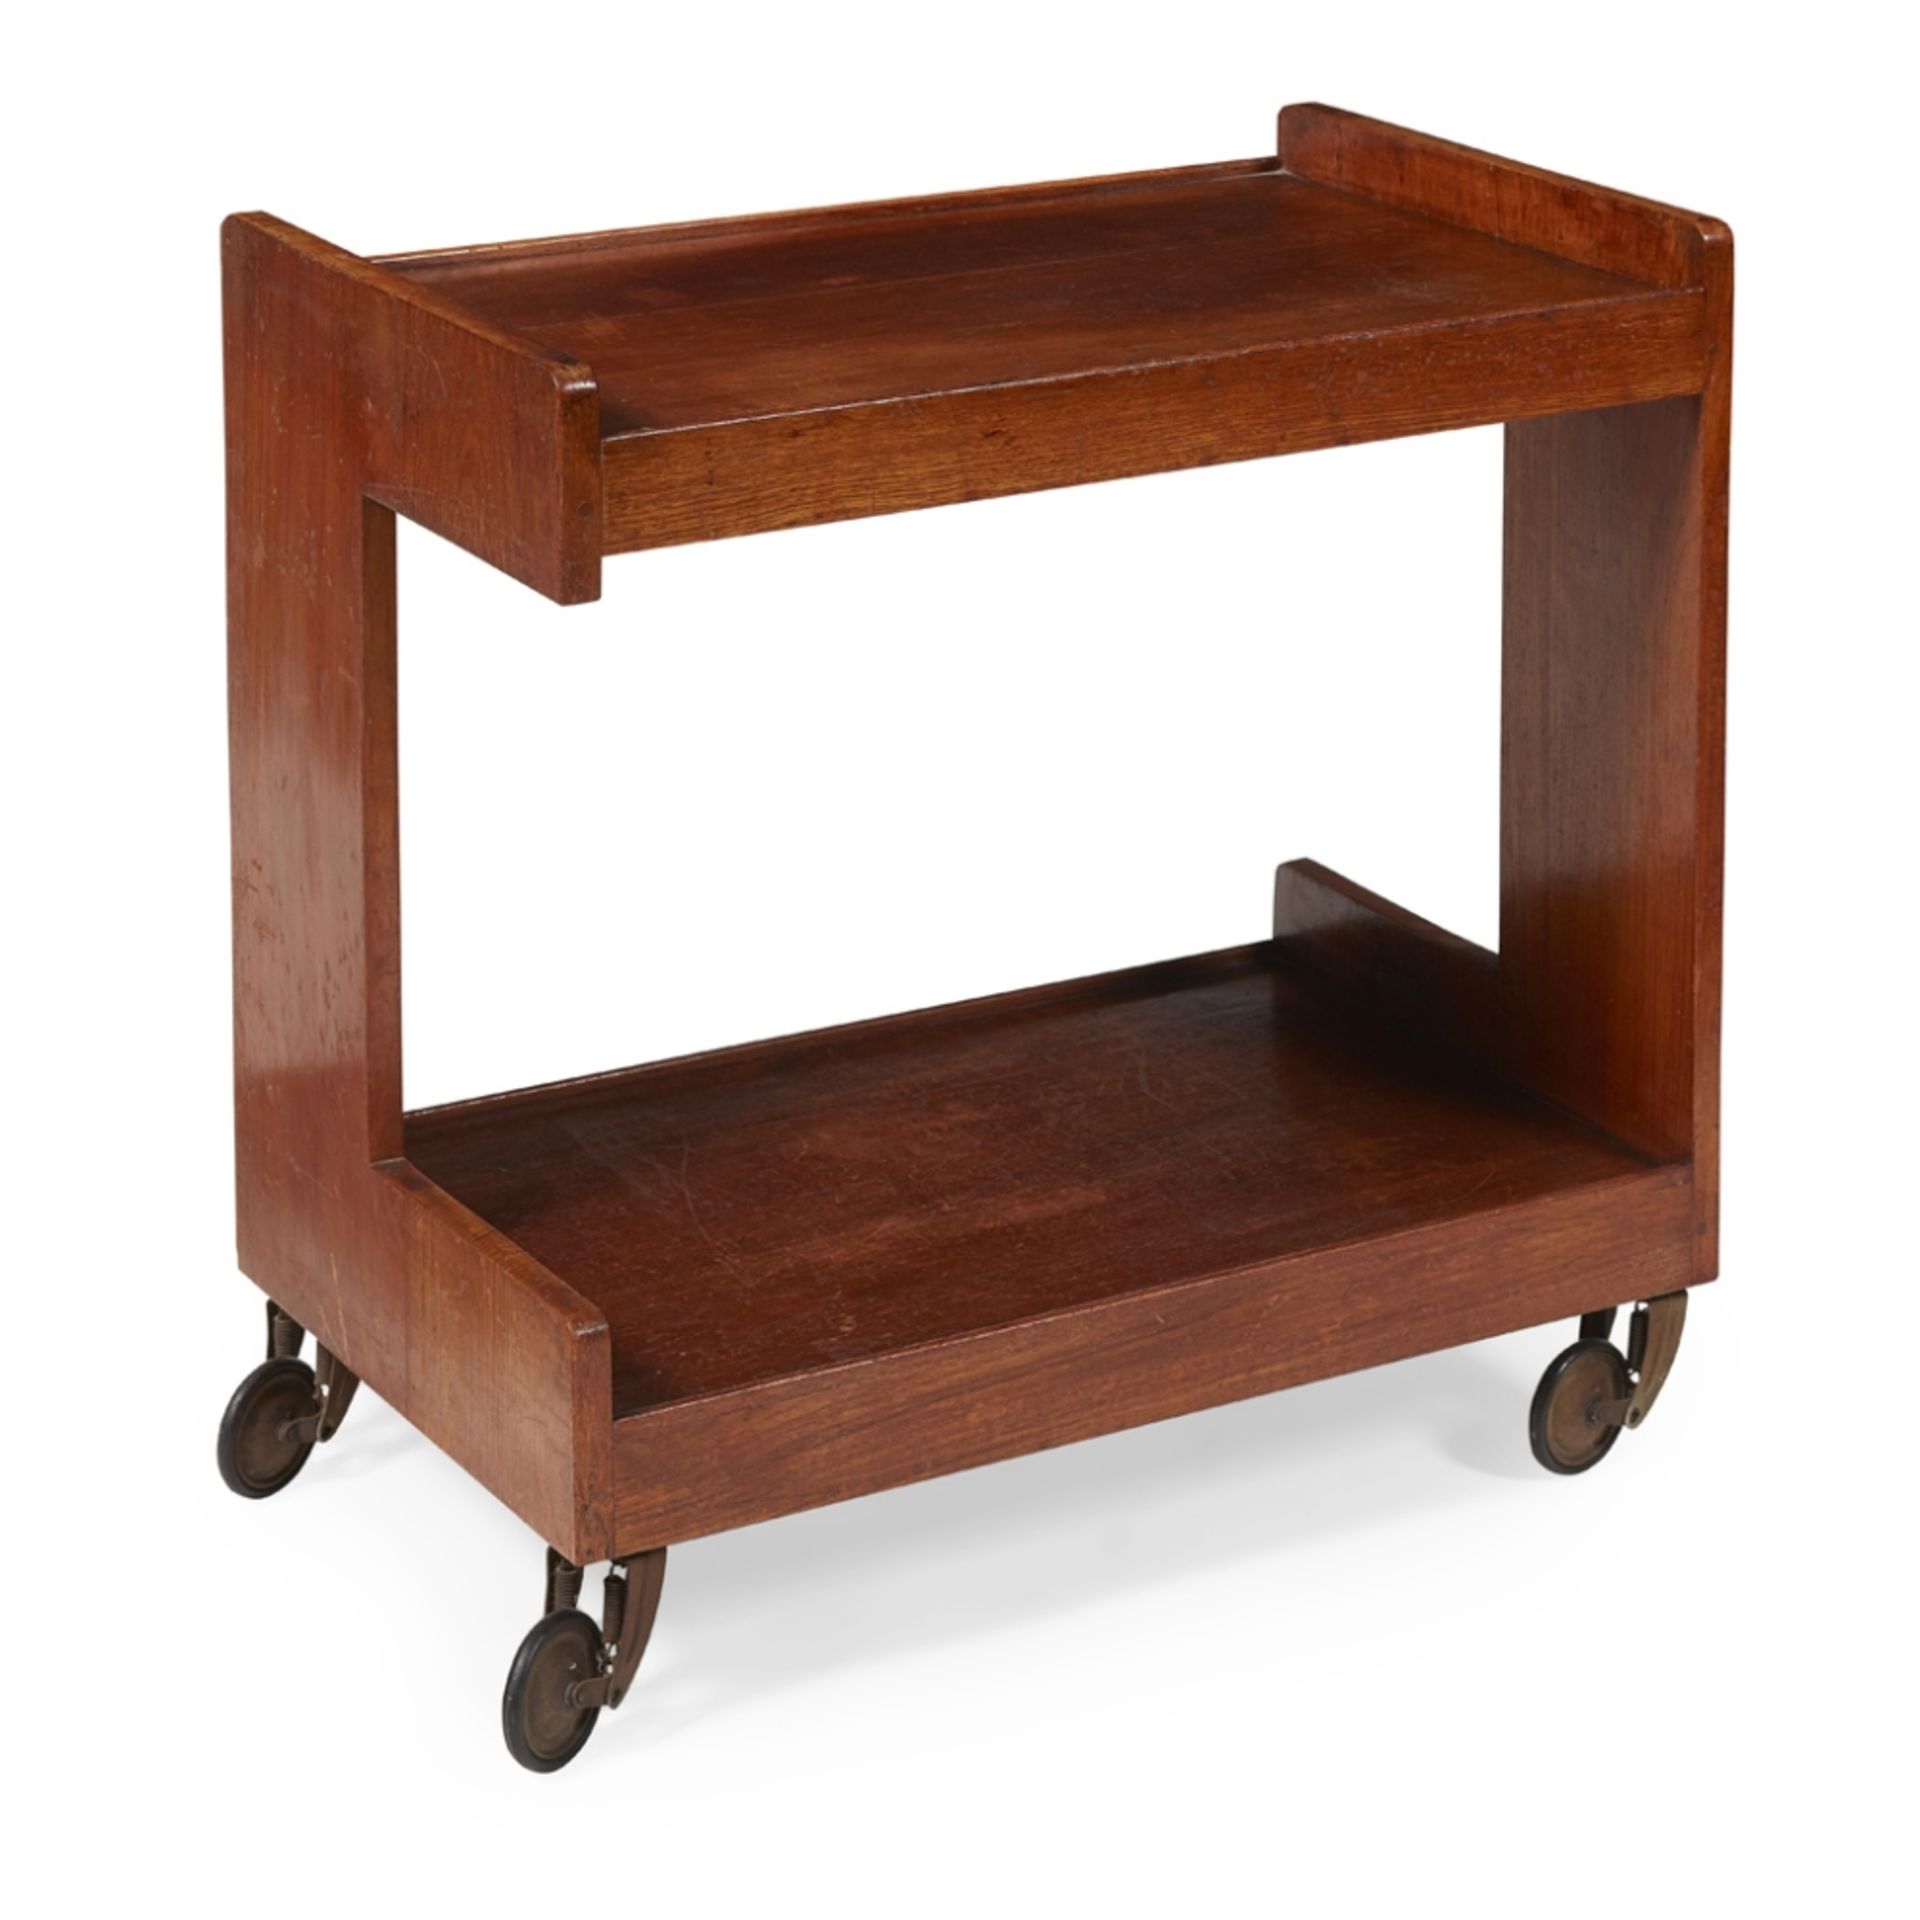 IN THE MANNER OF GERALD SUMMERS (1899-1967) DINNER WAGON, stained birchwood plywood 66cm wide, 71cm